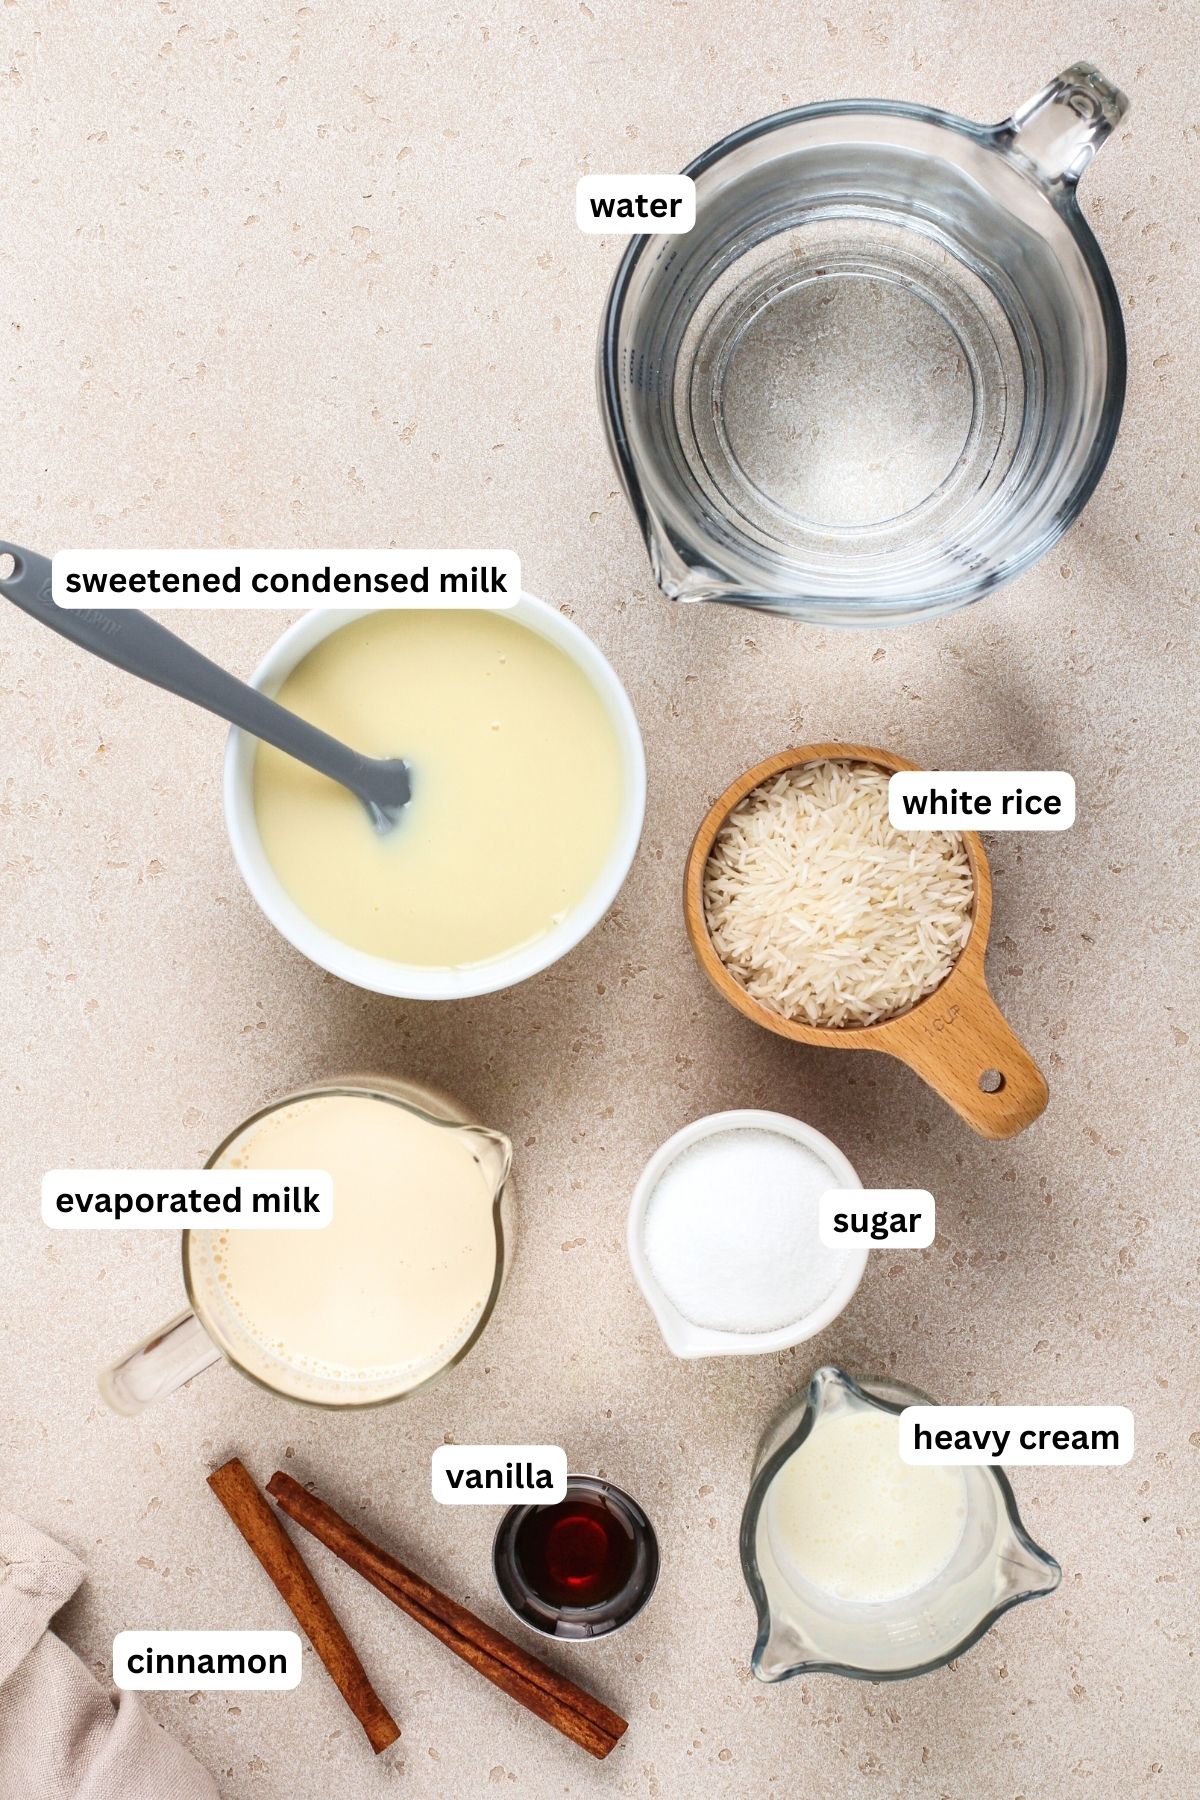 Ingredients for homemade horchata recipe arranged in bowls. From top to bottom: water, sweetened condensed milk, white rice, evaporated milk, granulated sugar, heavy cream, vanilla and cinnamon sticks.